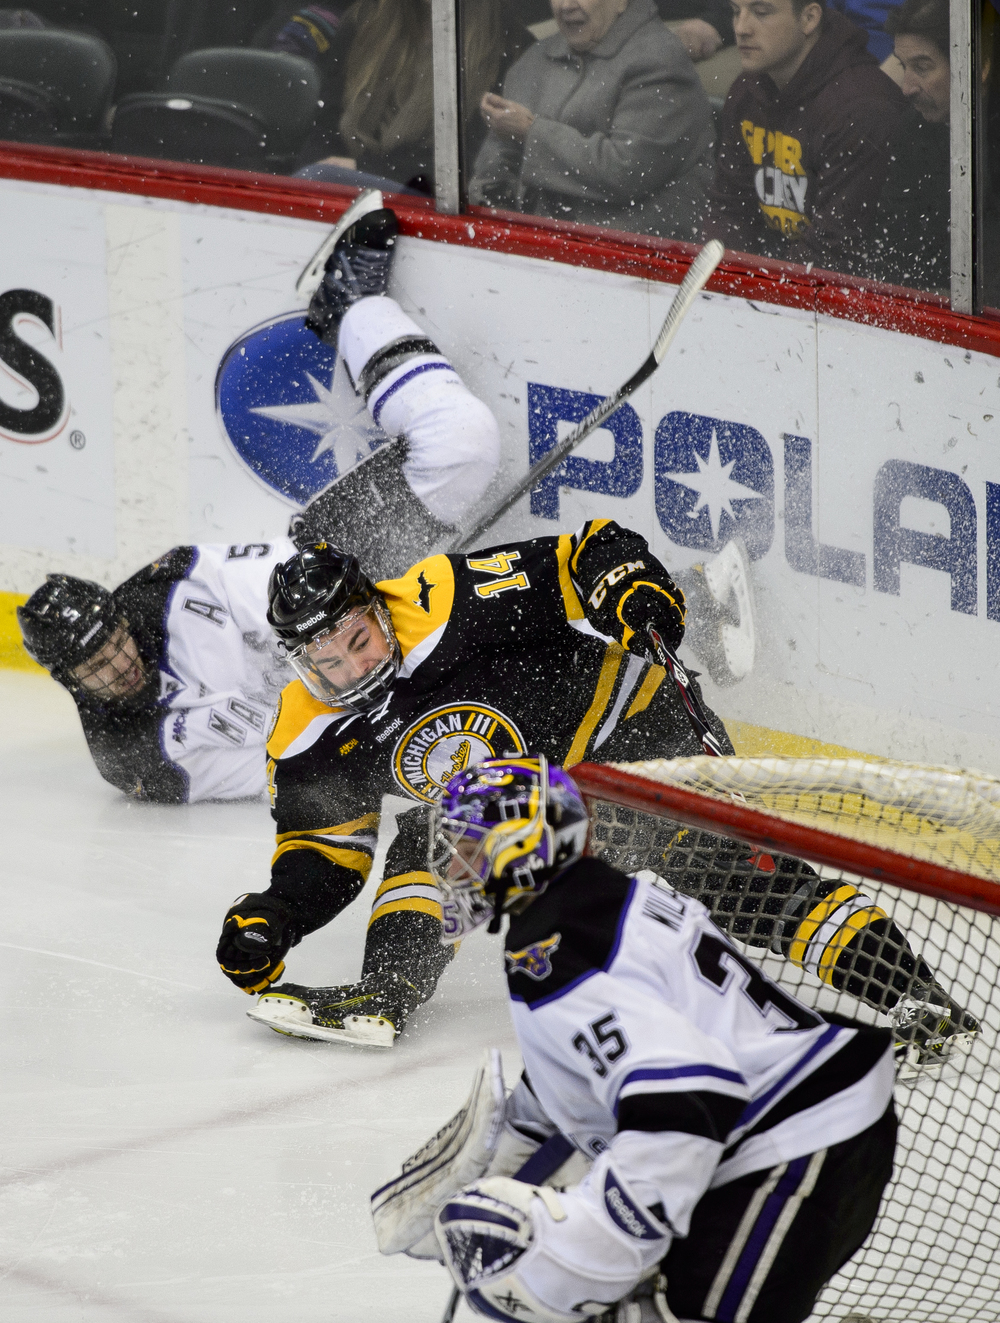  Stephon Williams #35 of Minnesota State watches as Carter Foguth #5 of Minnesota State and Malcolm Gould #14 of Michigan Tech slide into the boards during the first period of the 2015 WCHA Final Five hockey championship game on March 21, 2015 at Xce